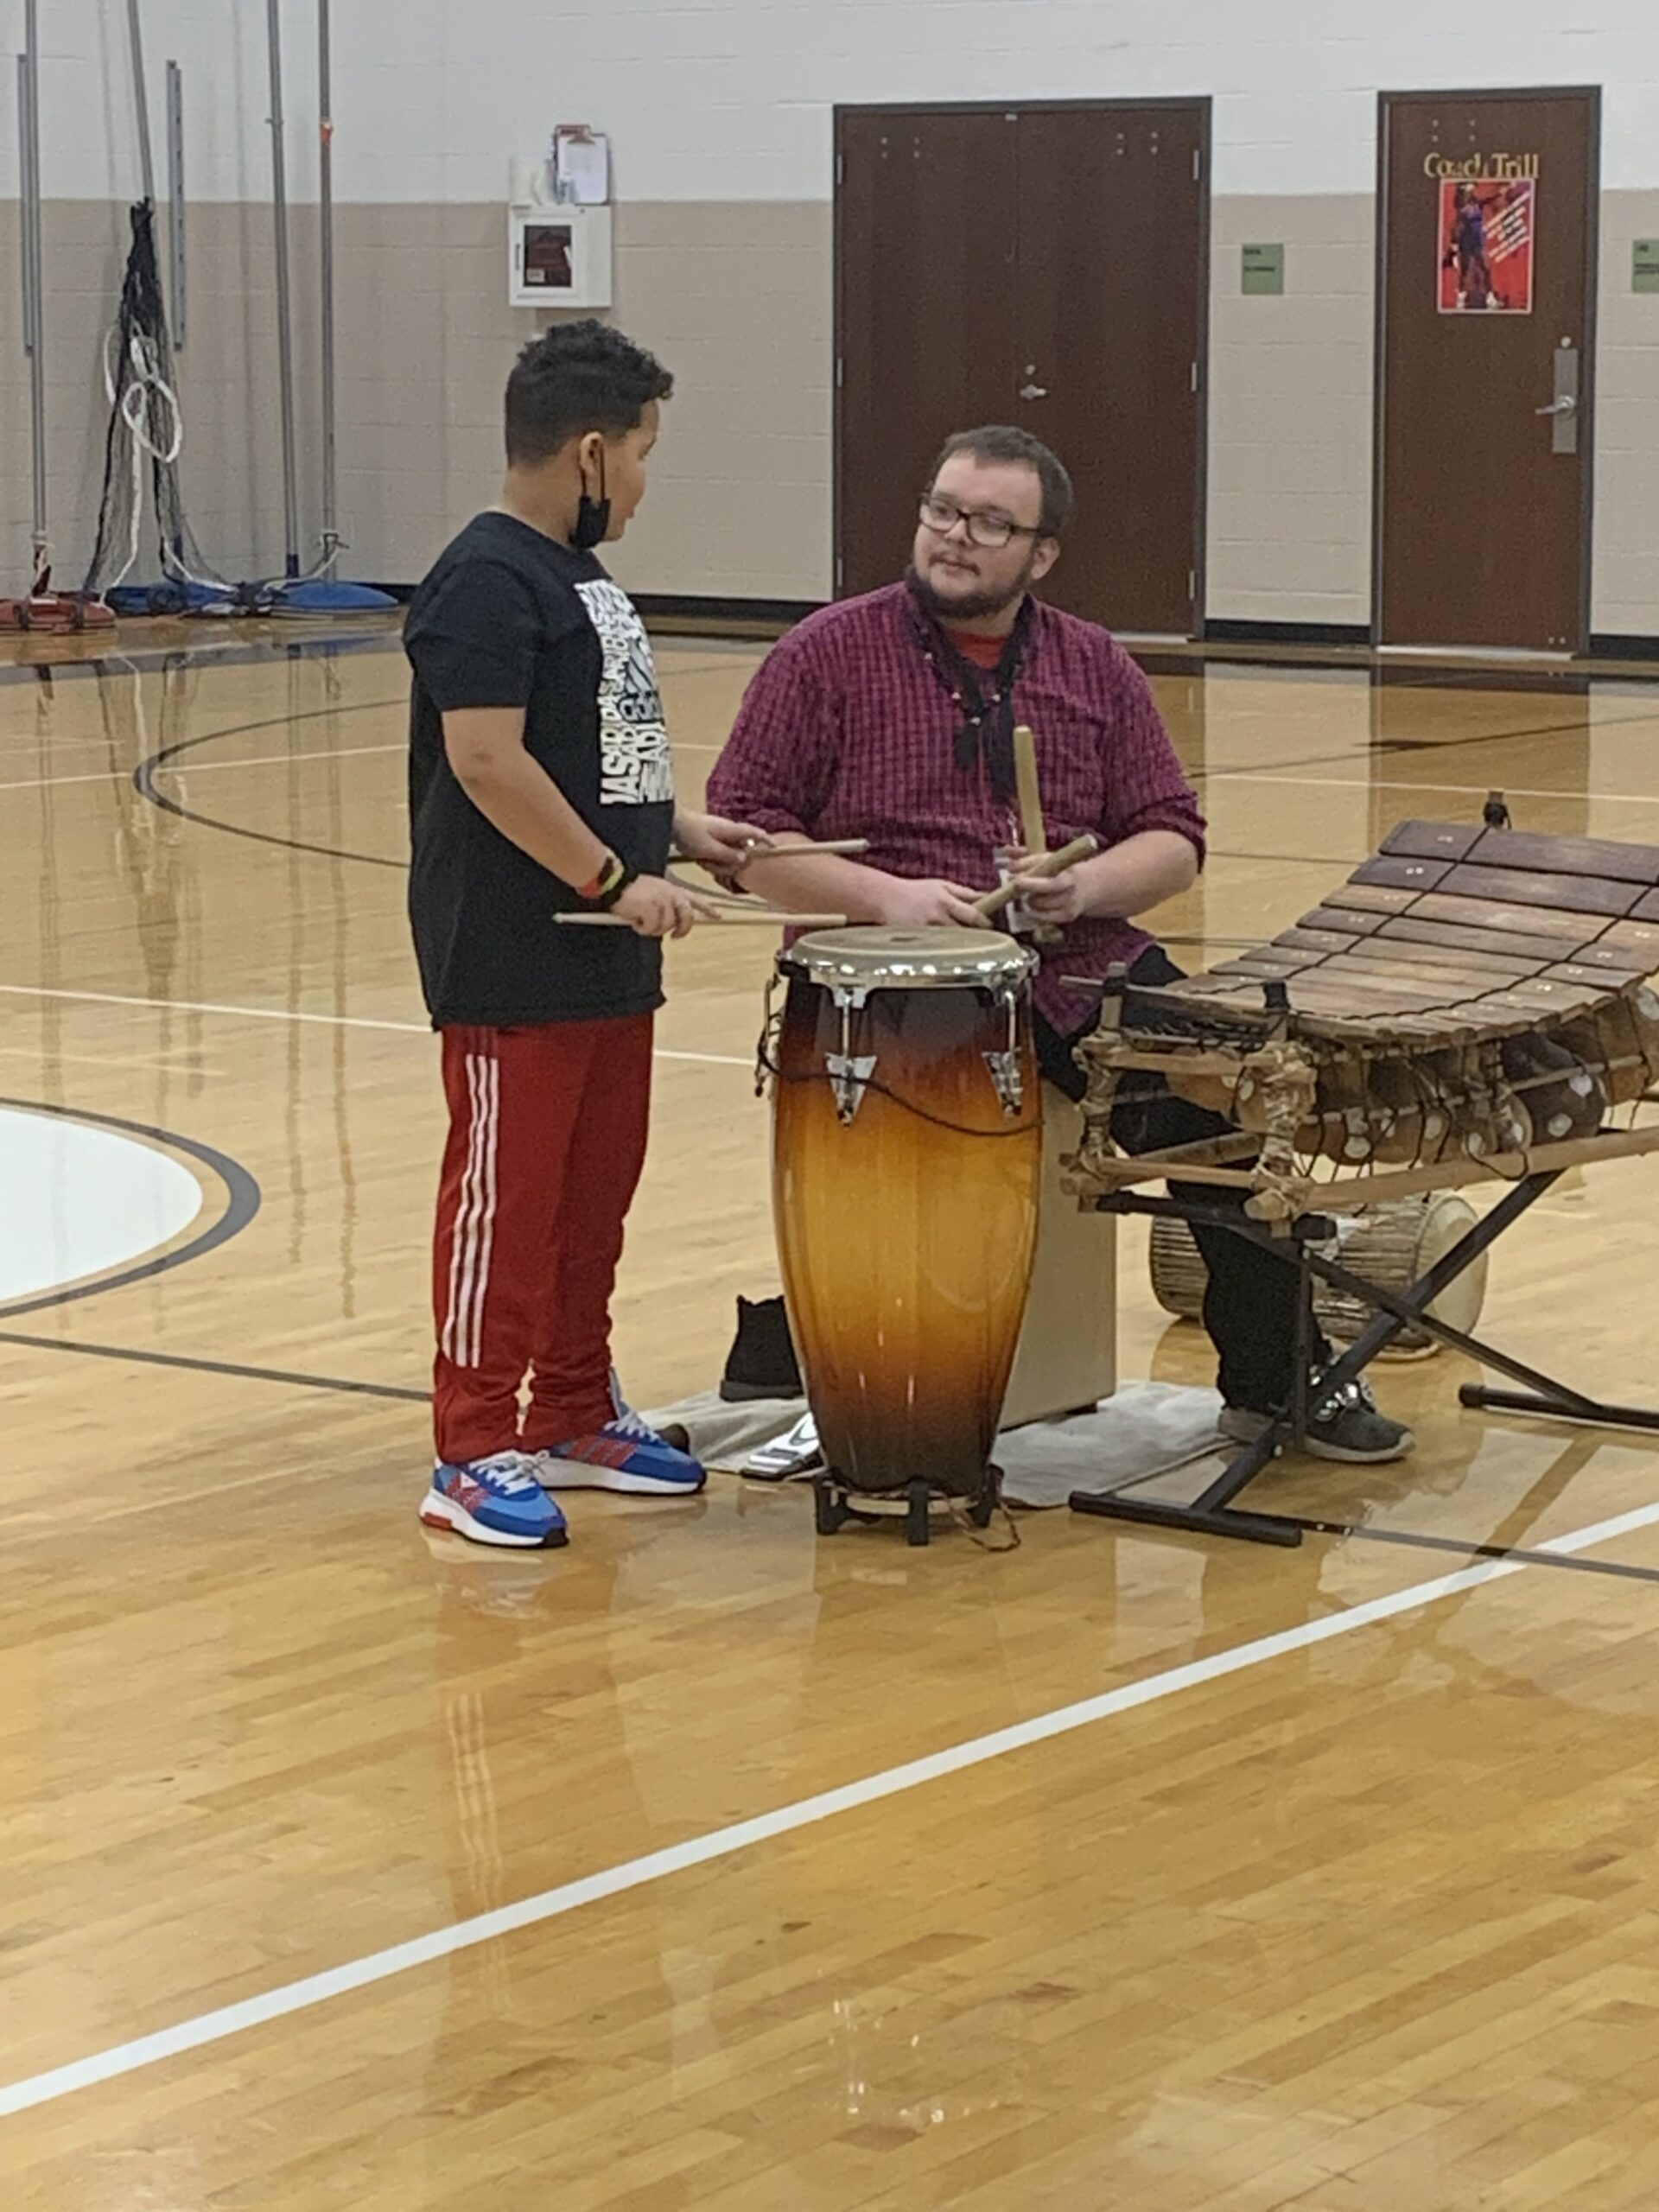 Drummer Performs for Students